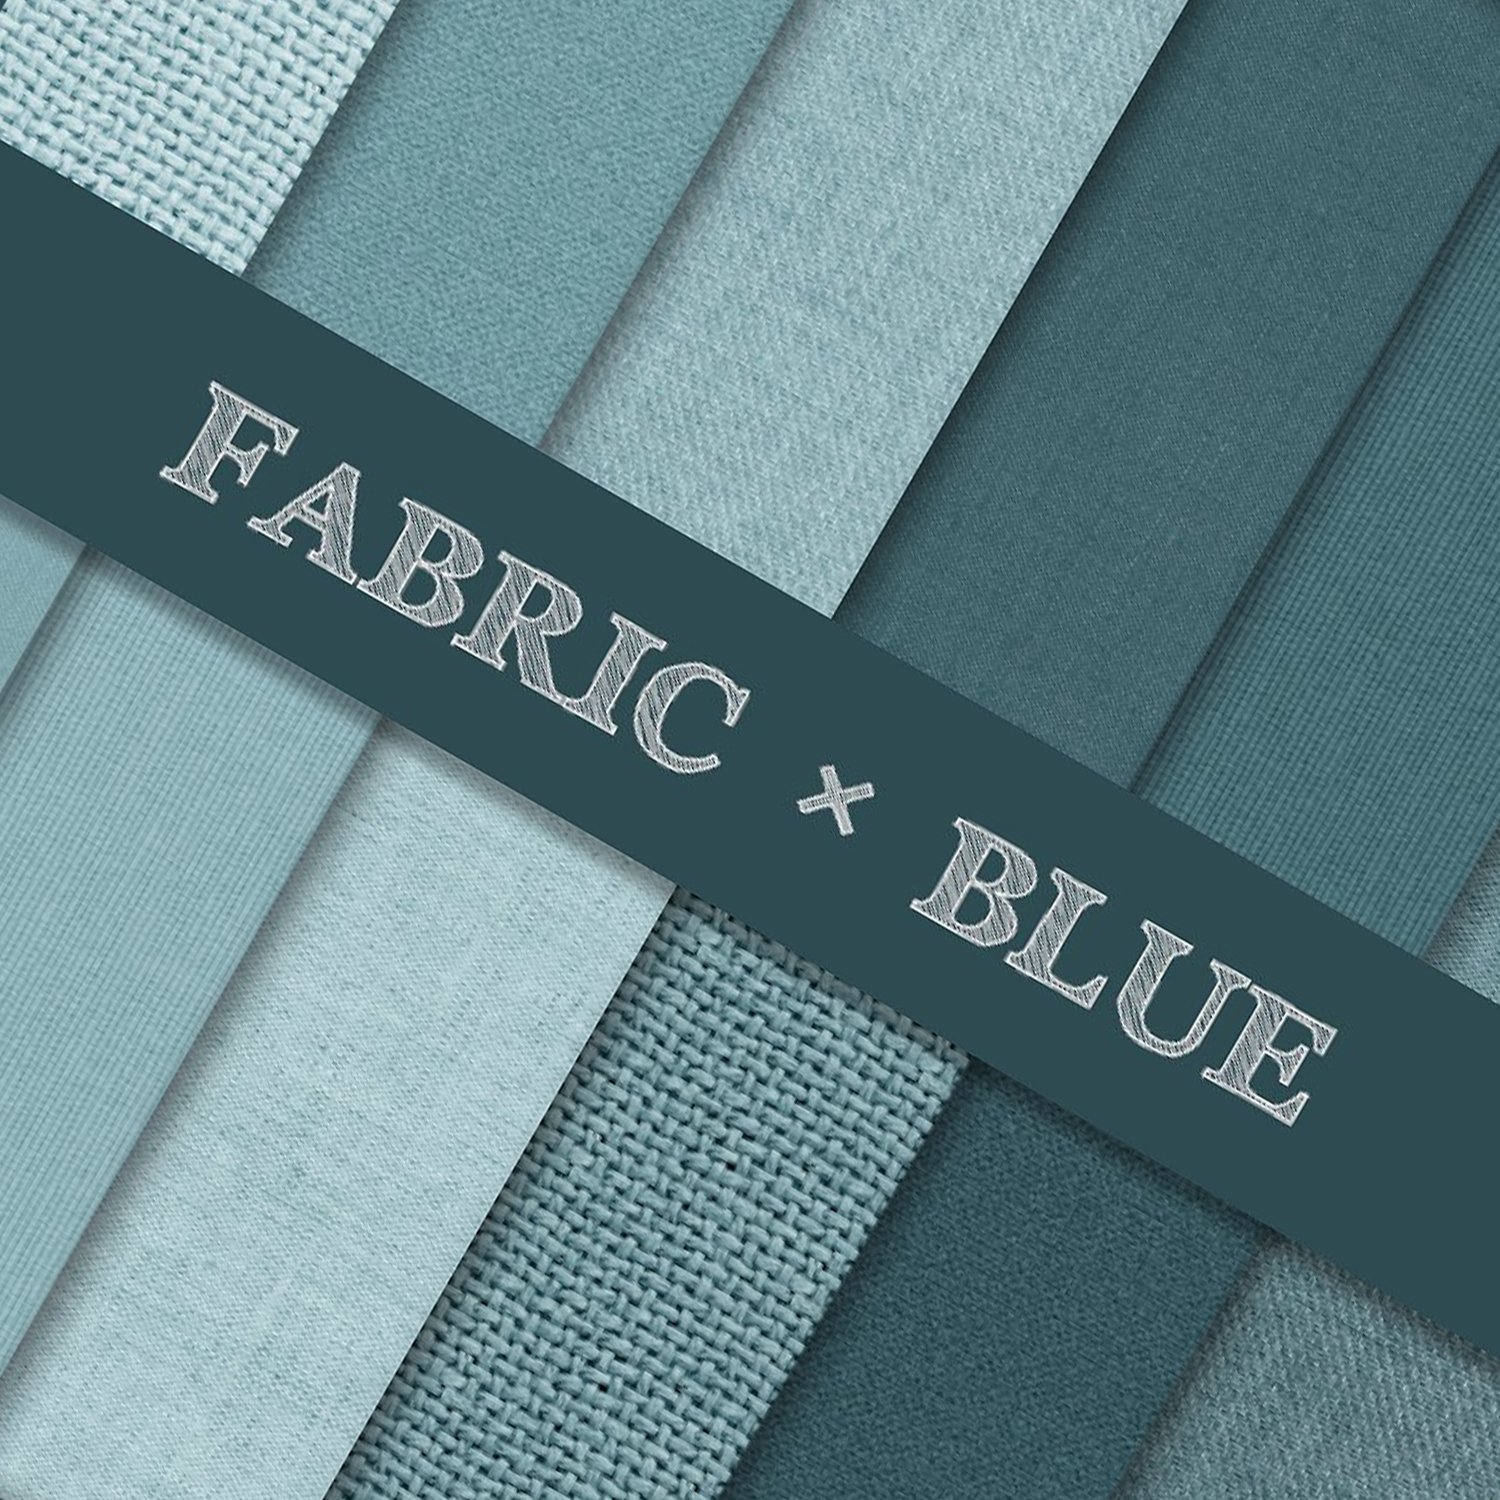 Preview fabric texture backgrounds blue.